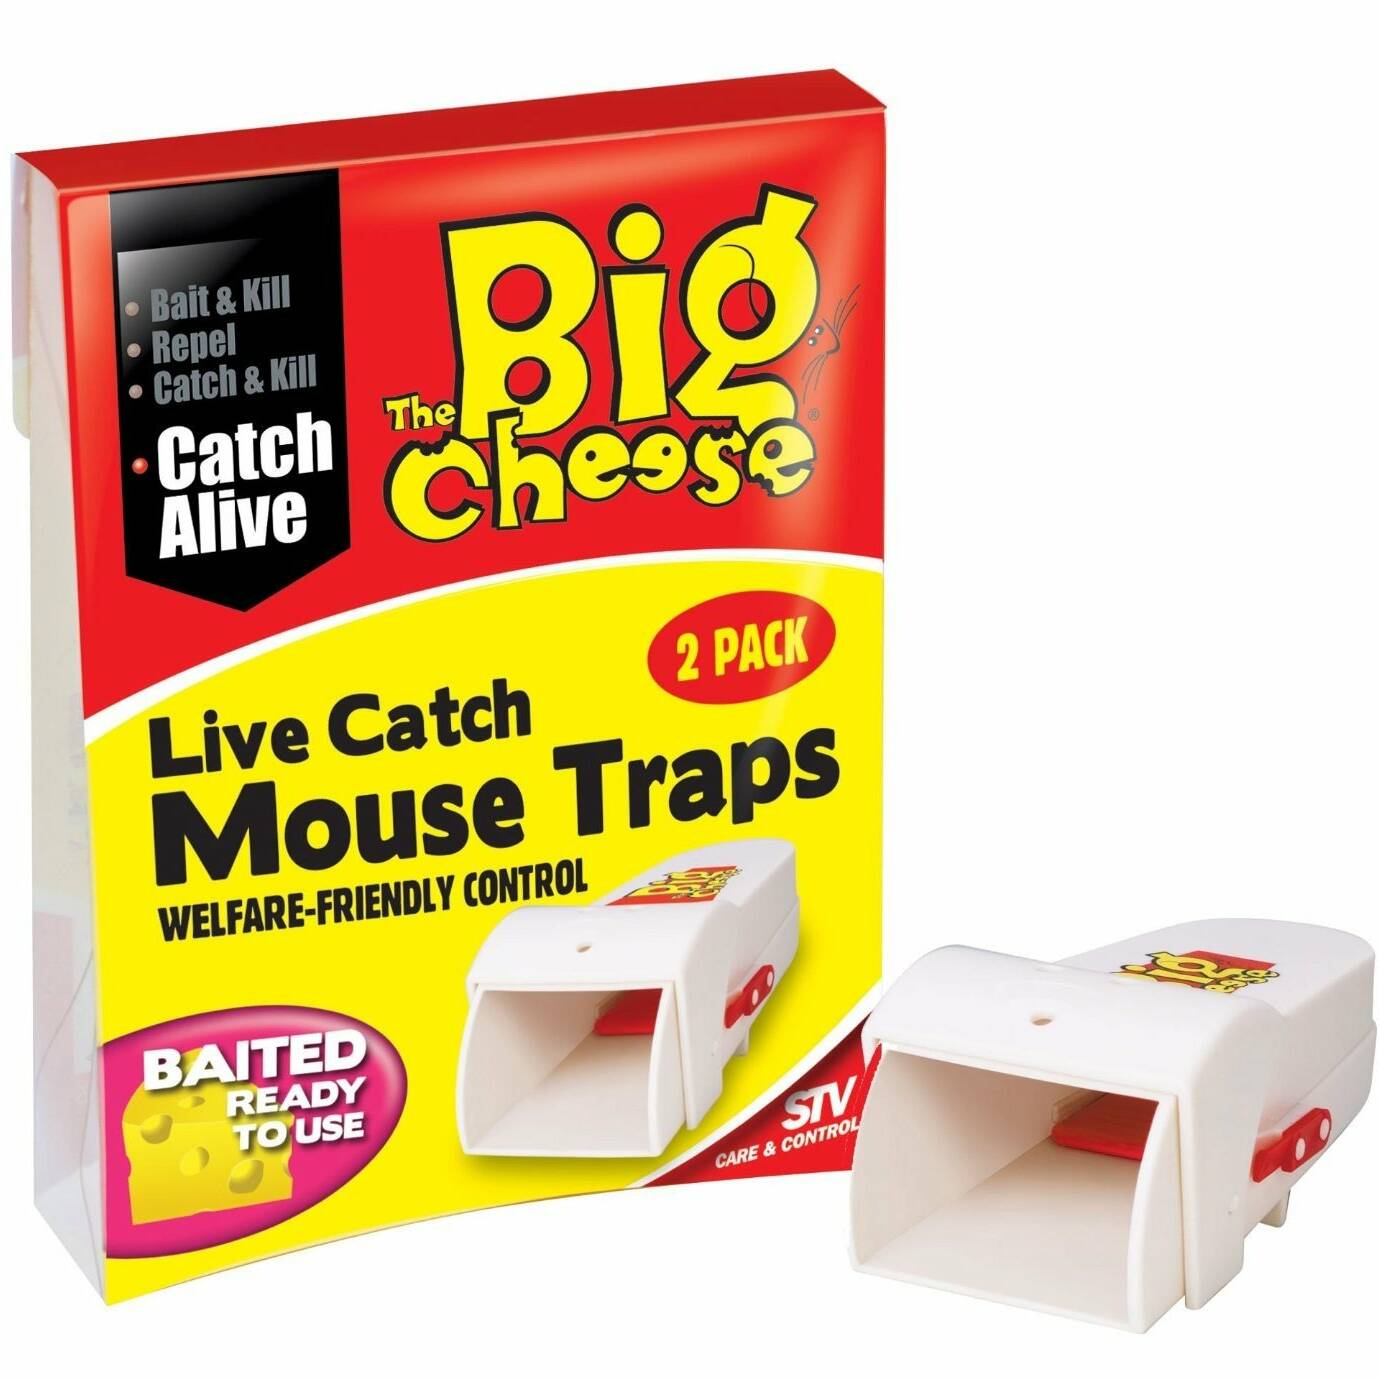 The Big Cheese Live Catch Ready To Use Mouse Trap - Twin Pack 